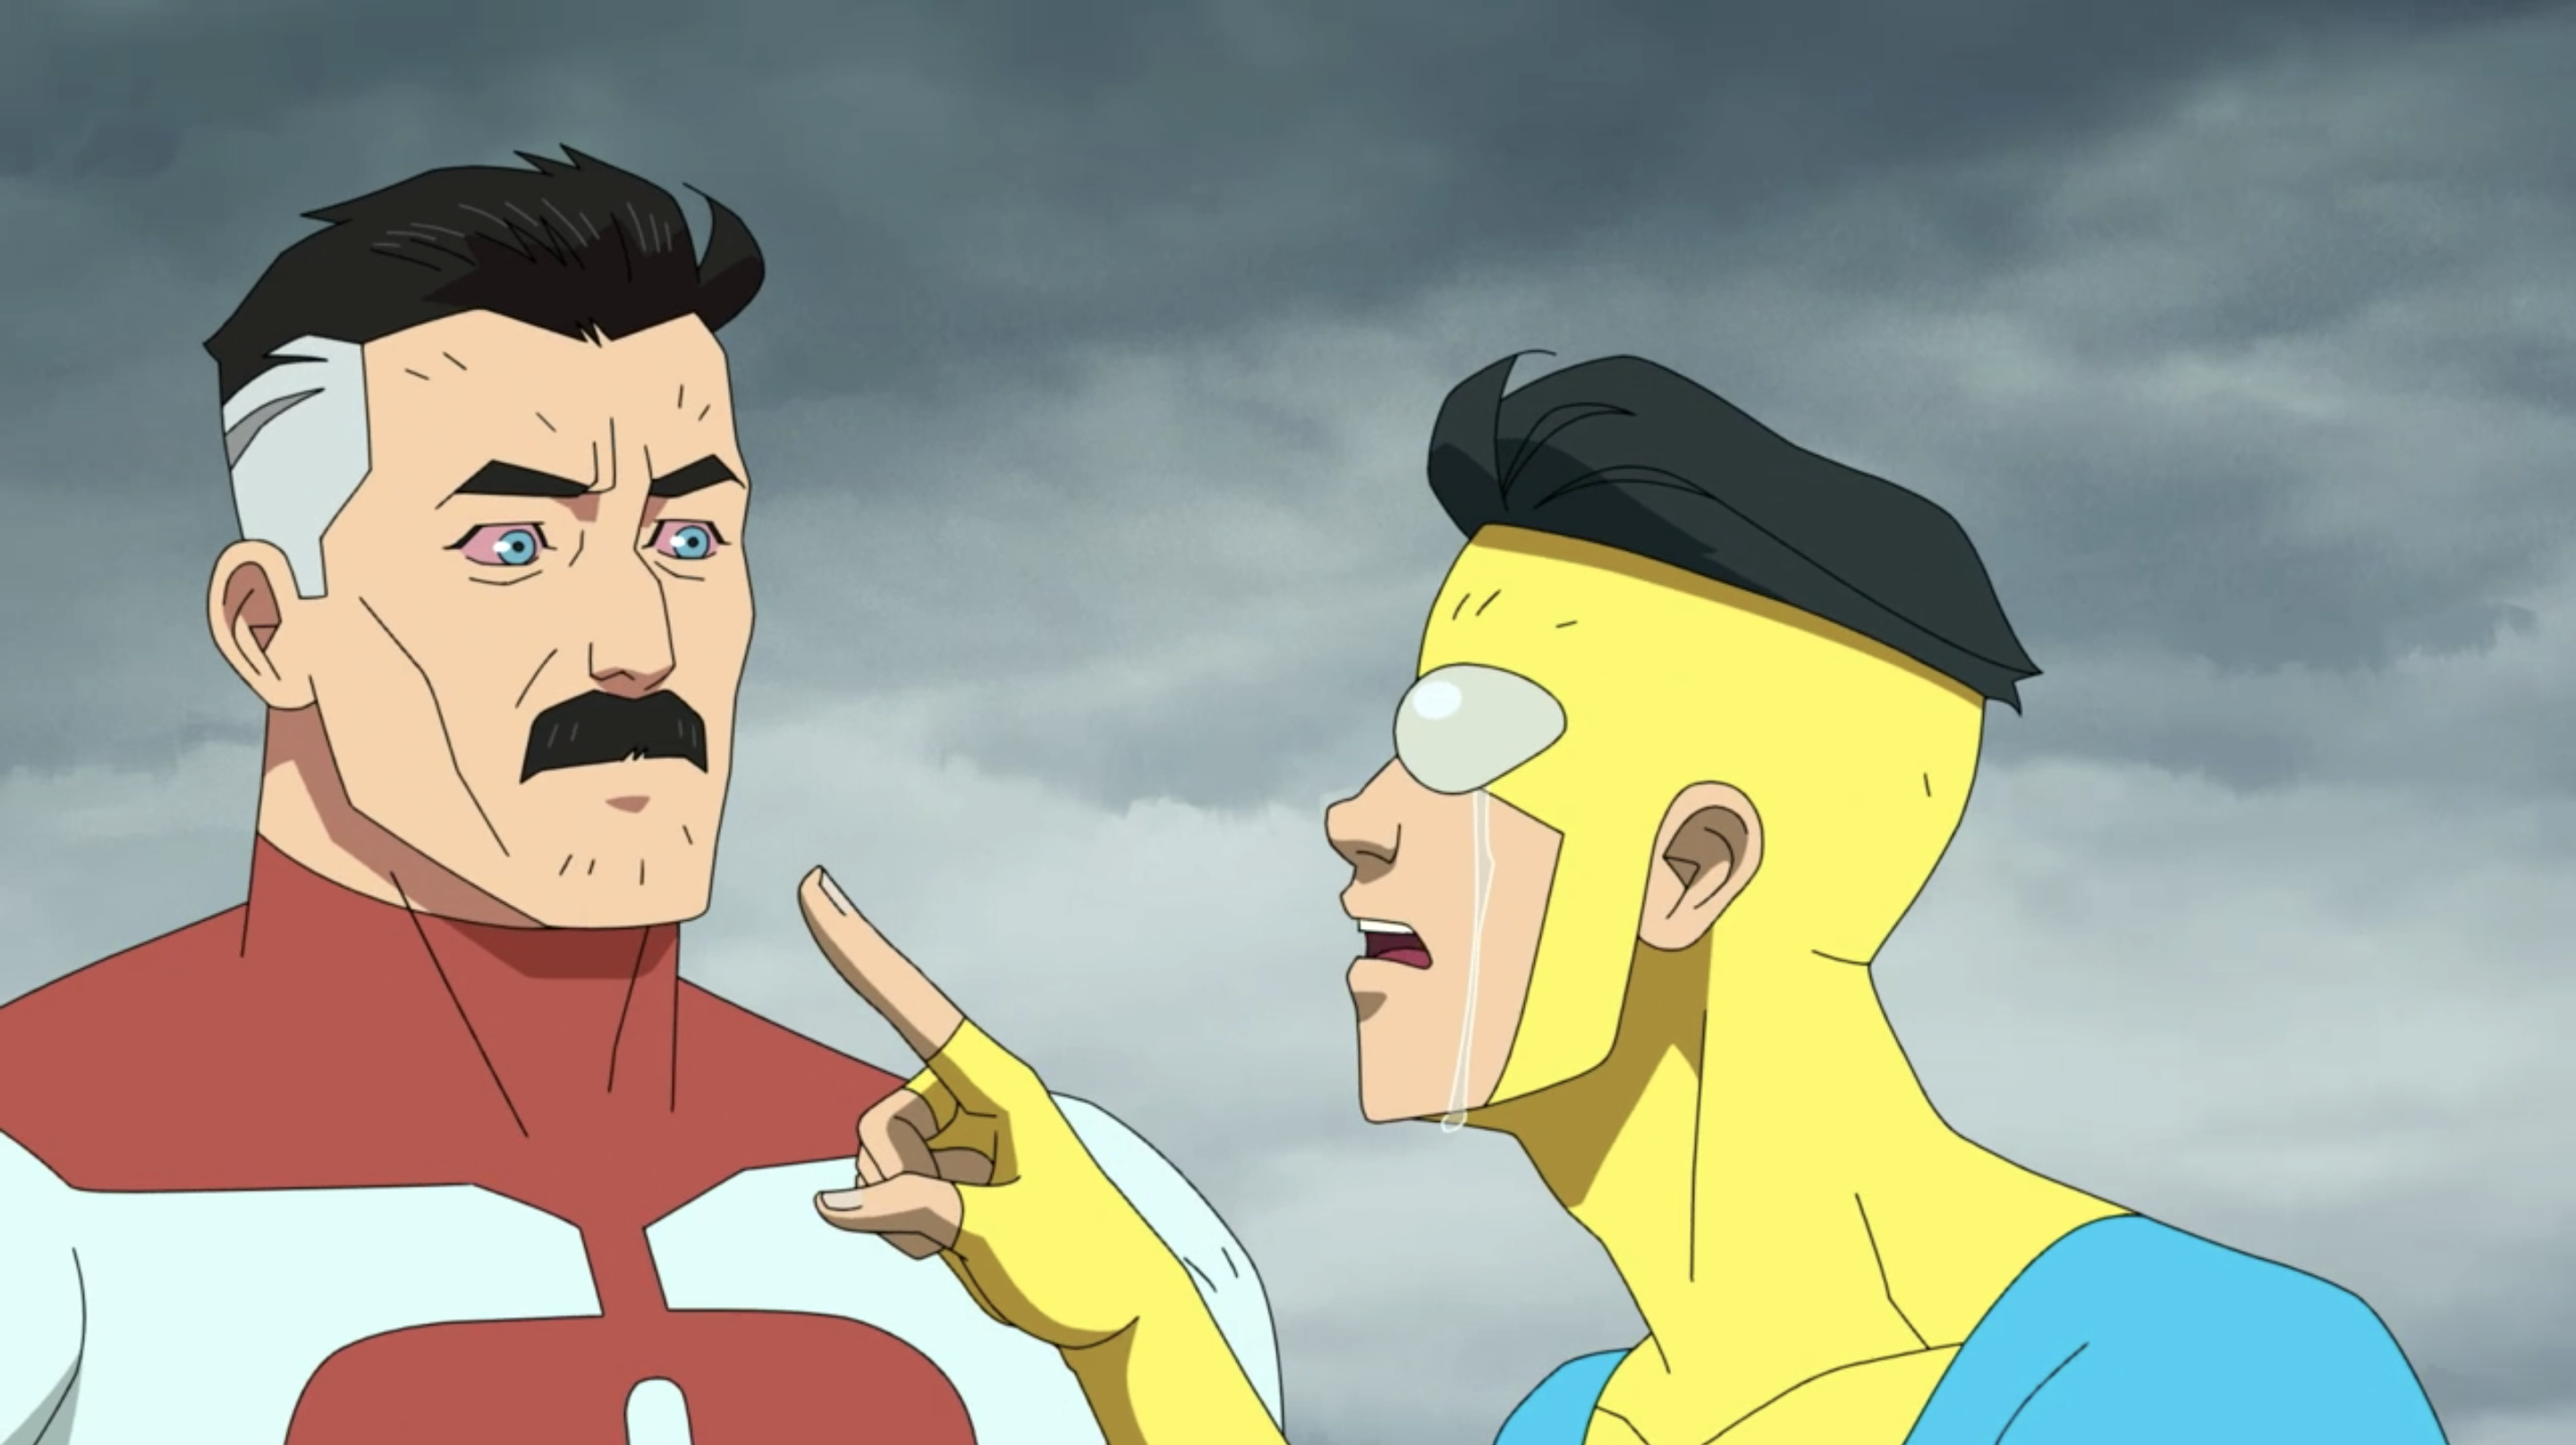 Invincible season 2: Daddy issues